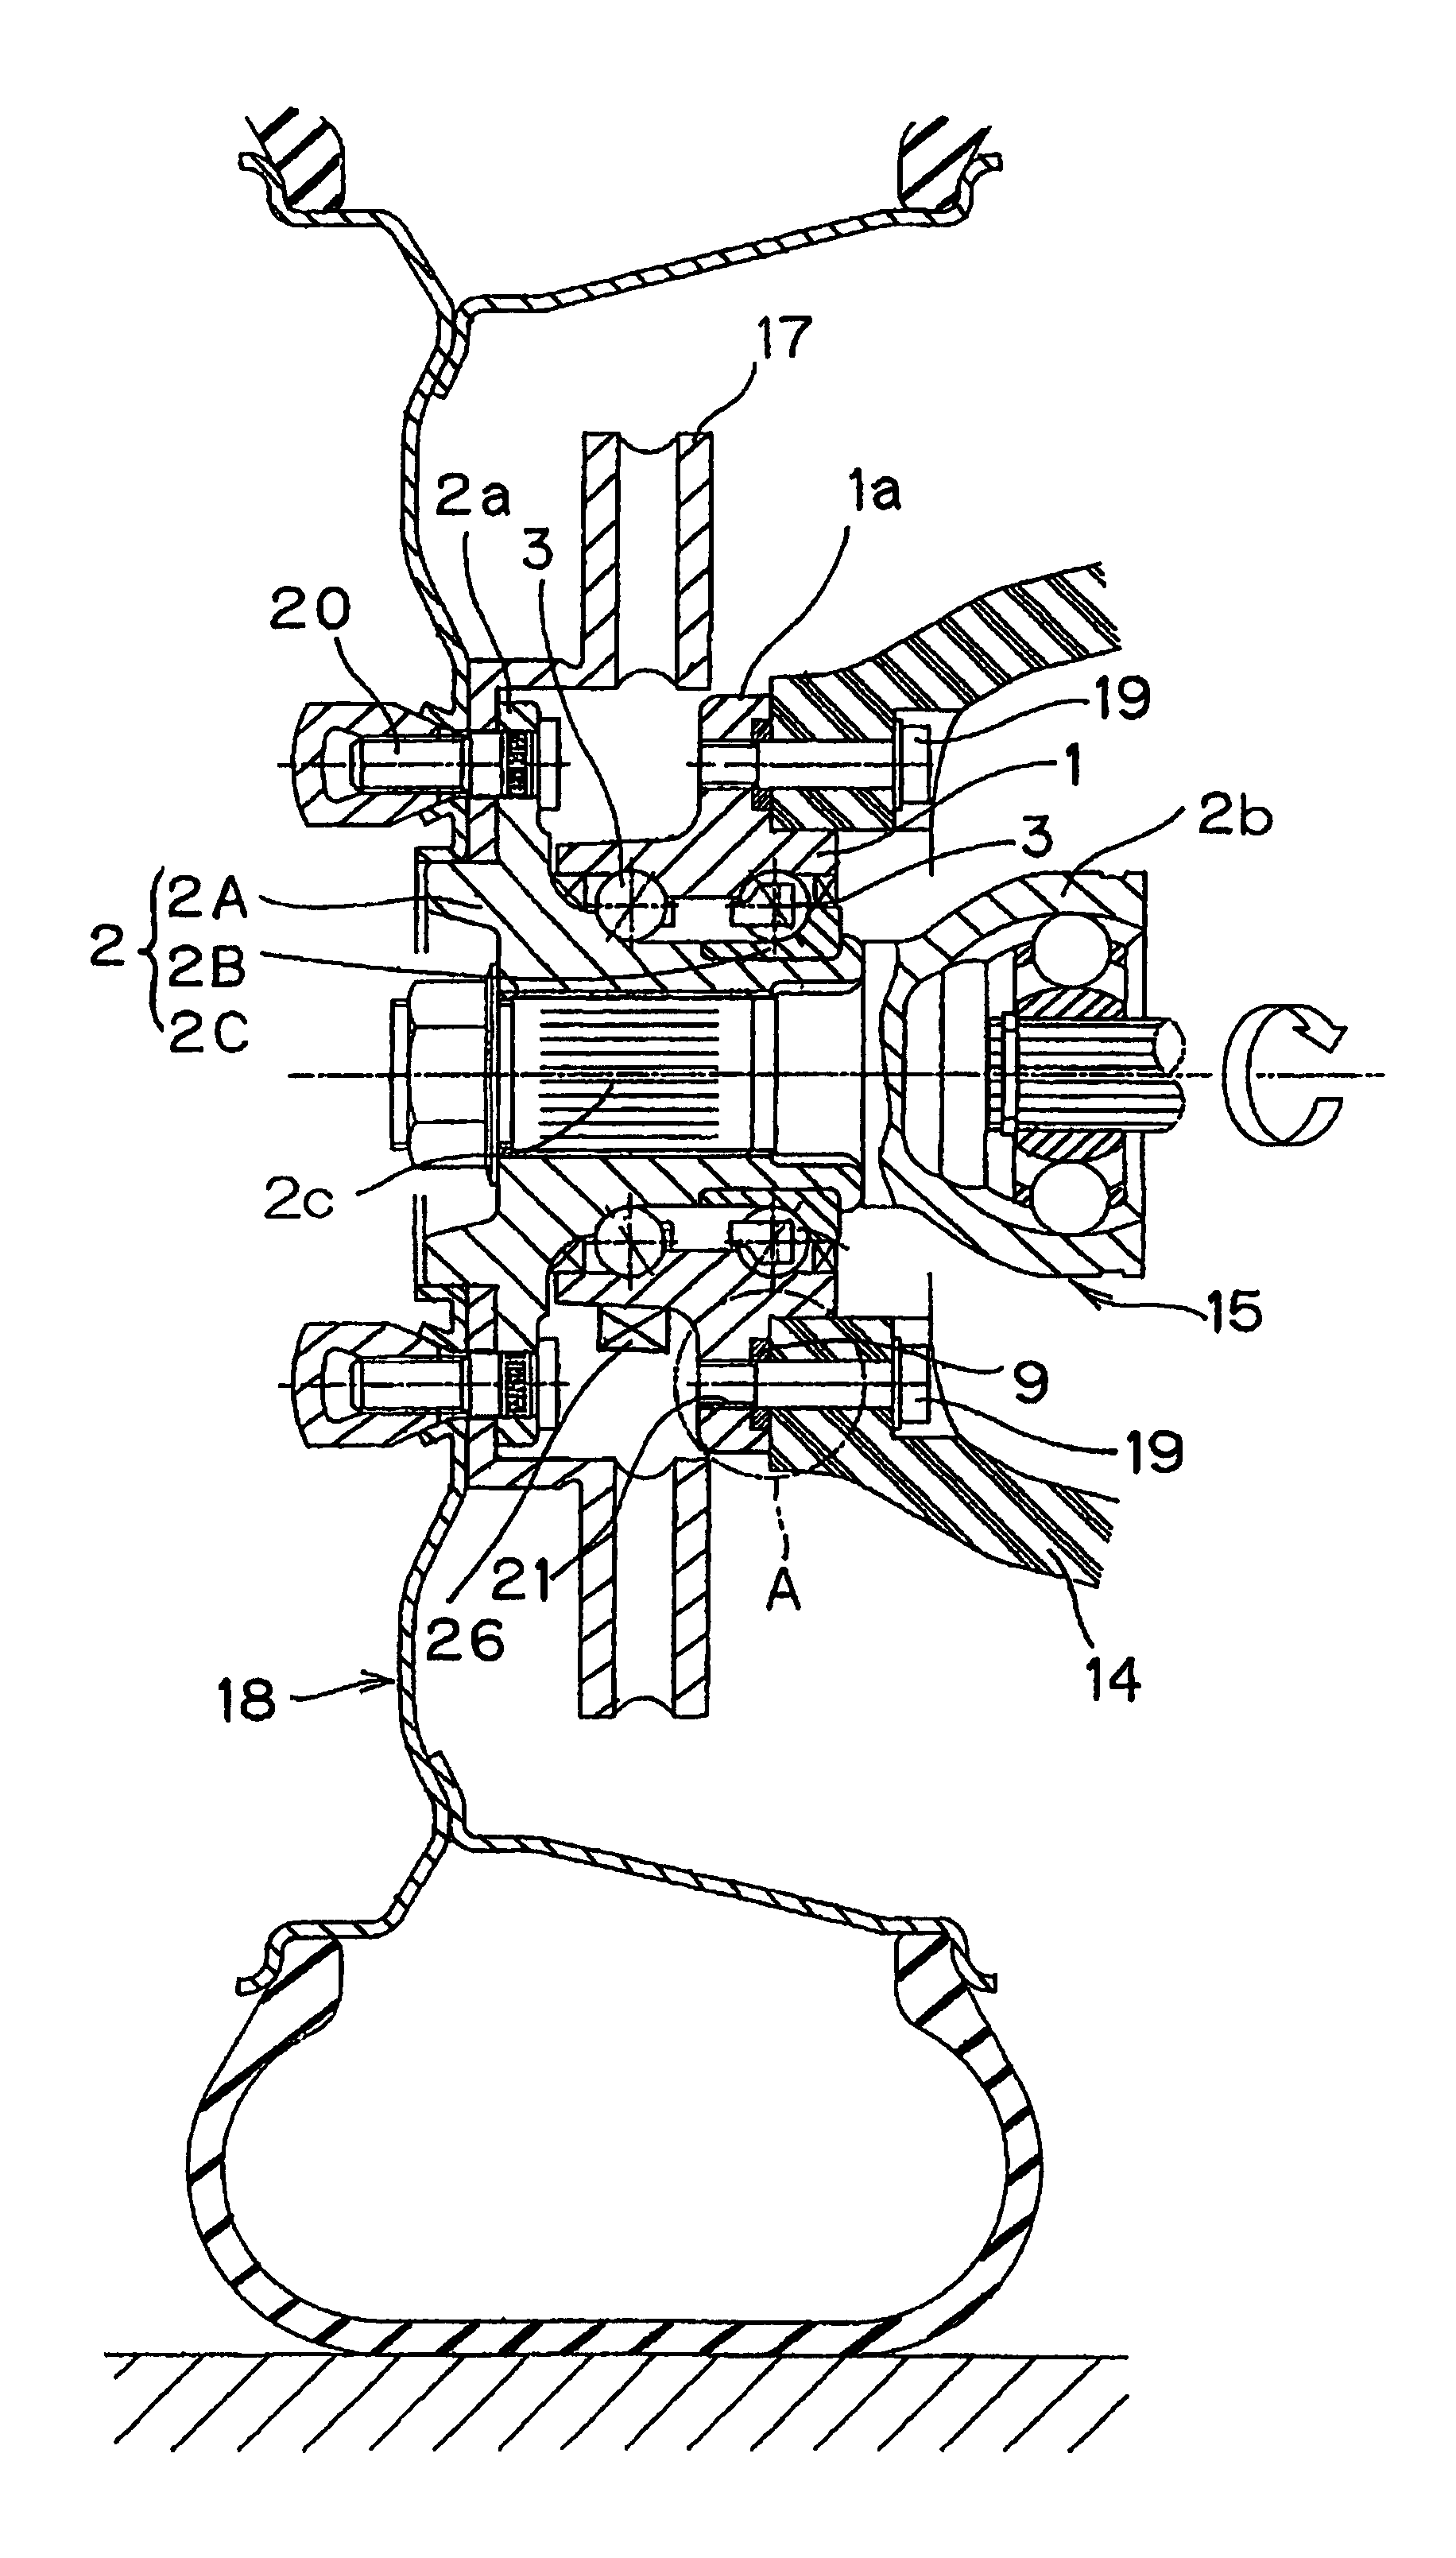 Sensor-integrated wheel support bearing assembly